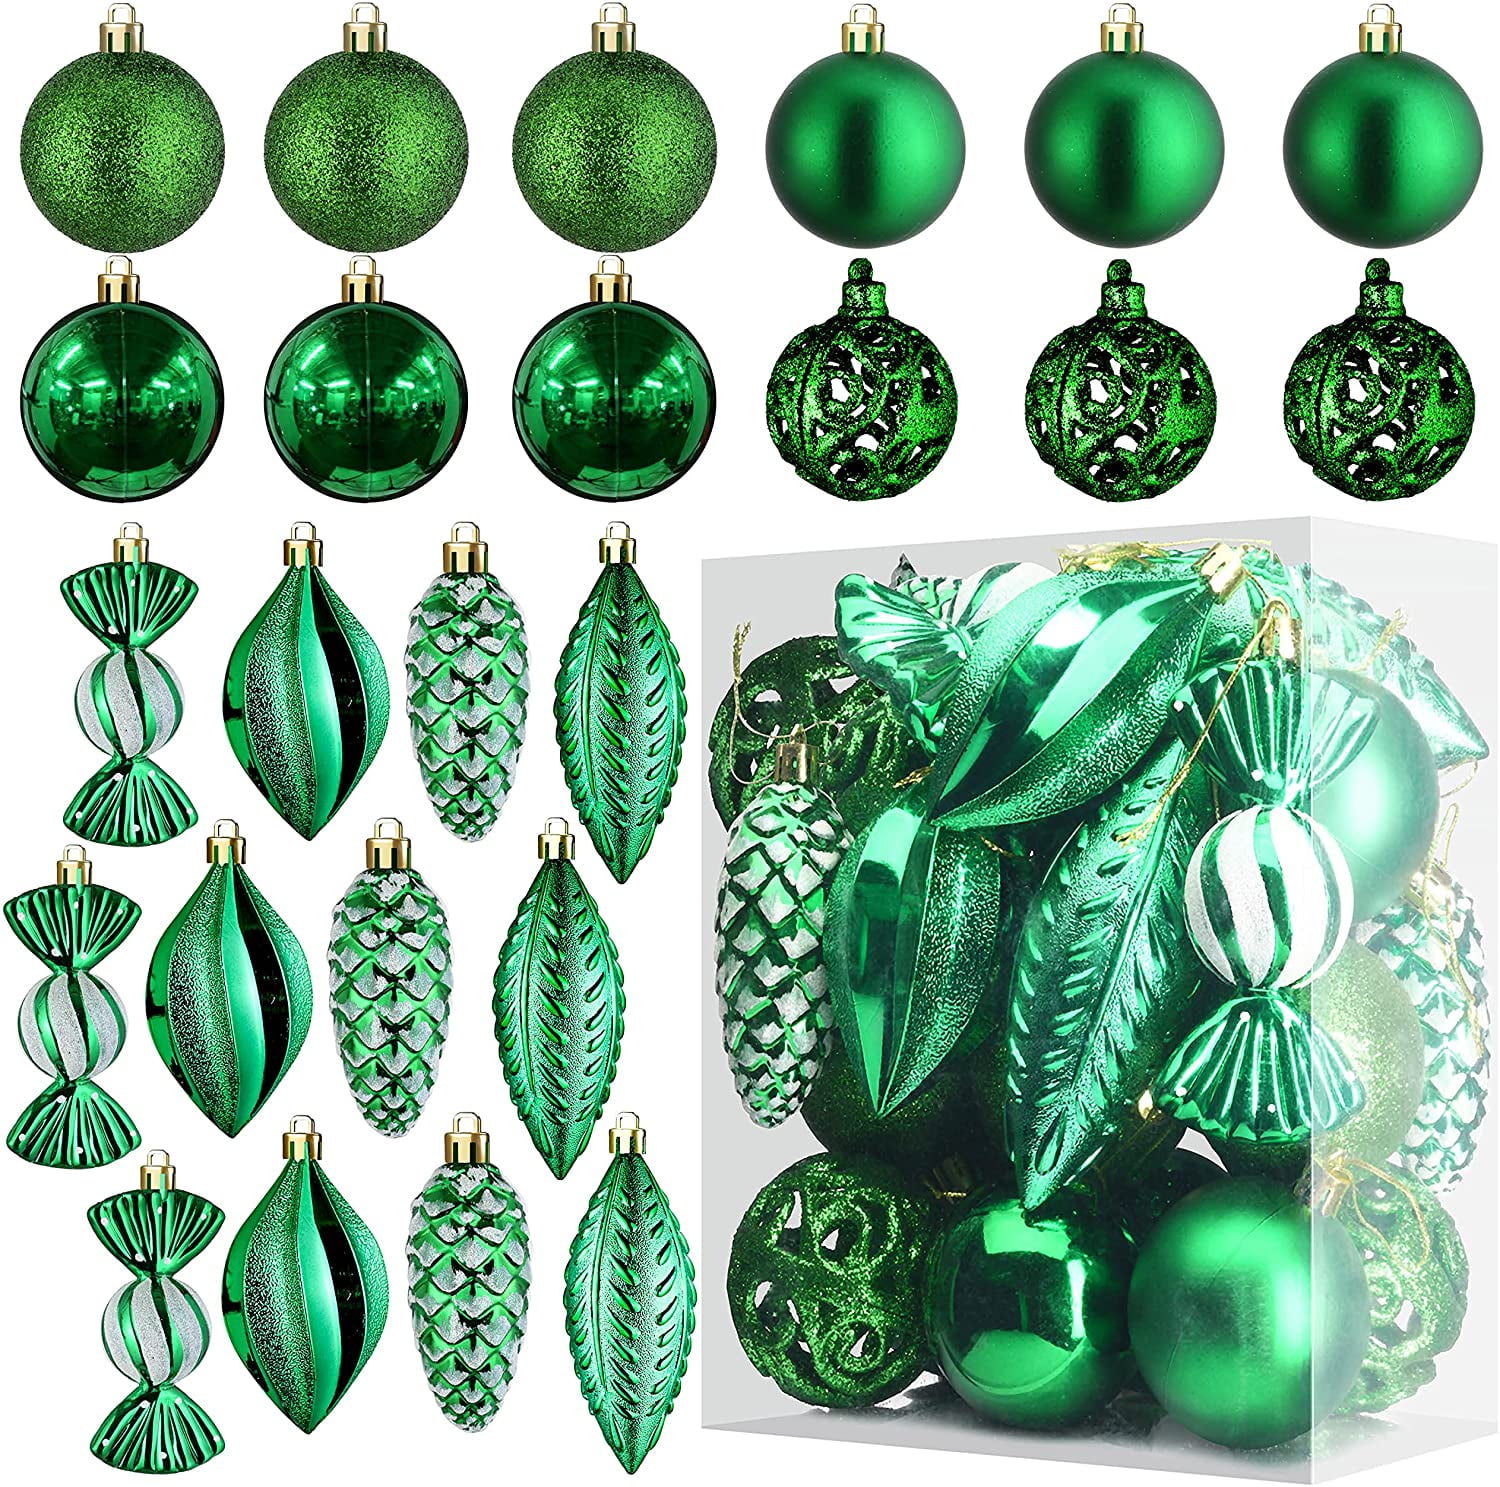 Green Christmas Ball Ornaments for Christmas Decorations - 24 Pieces ...